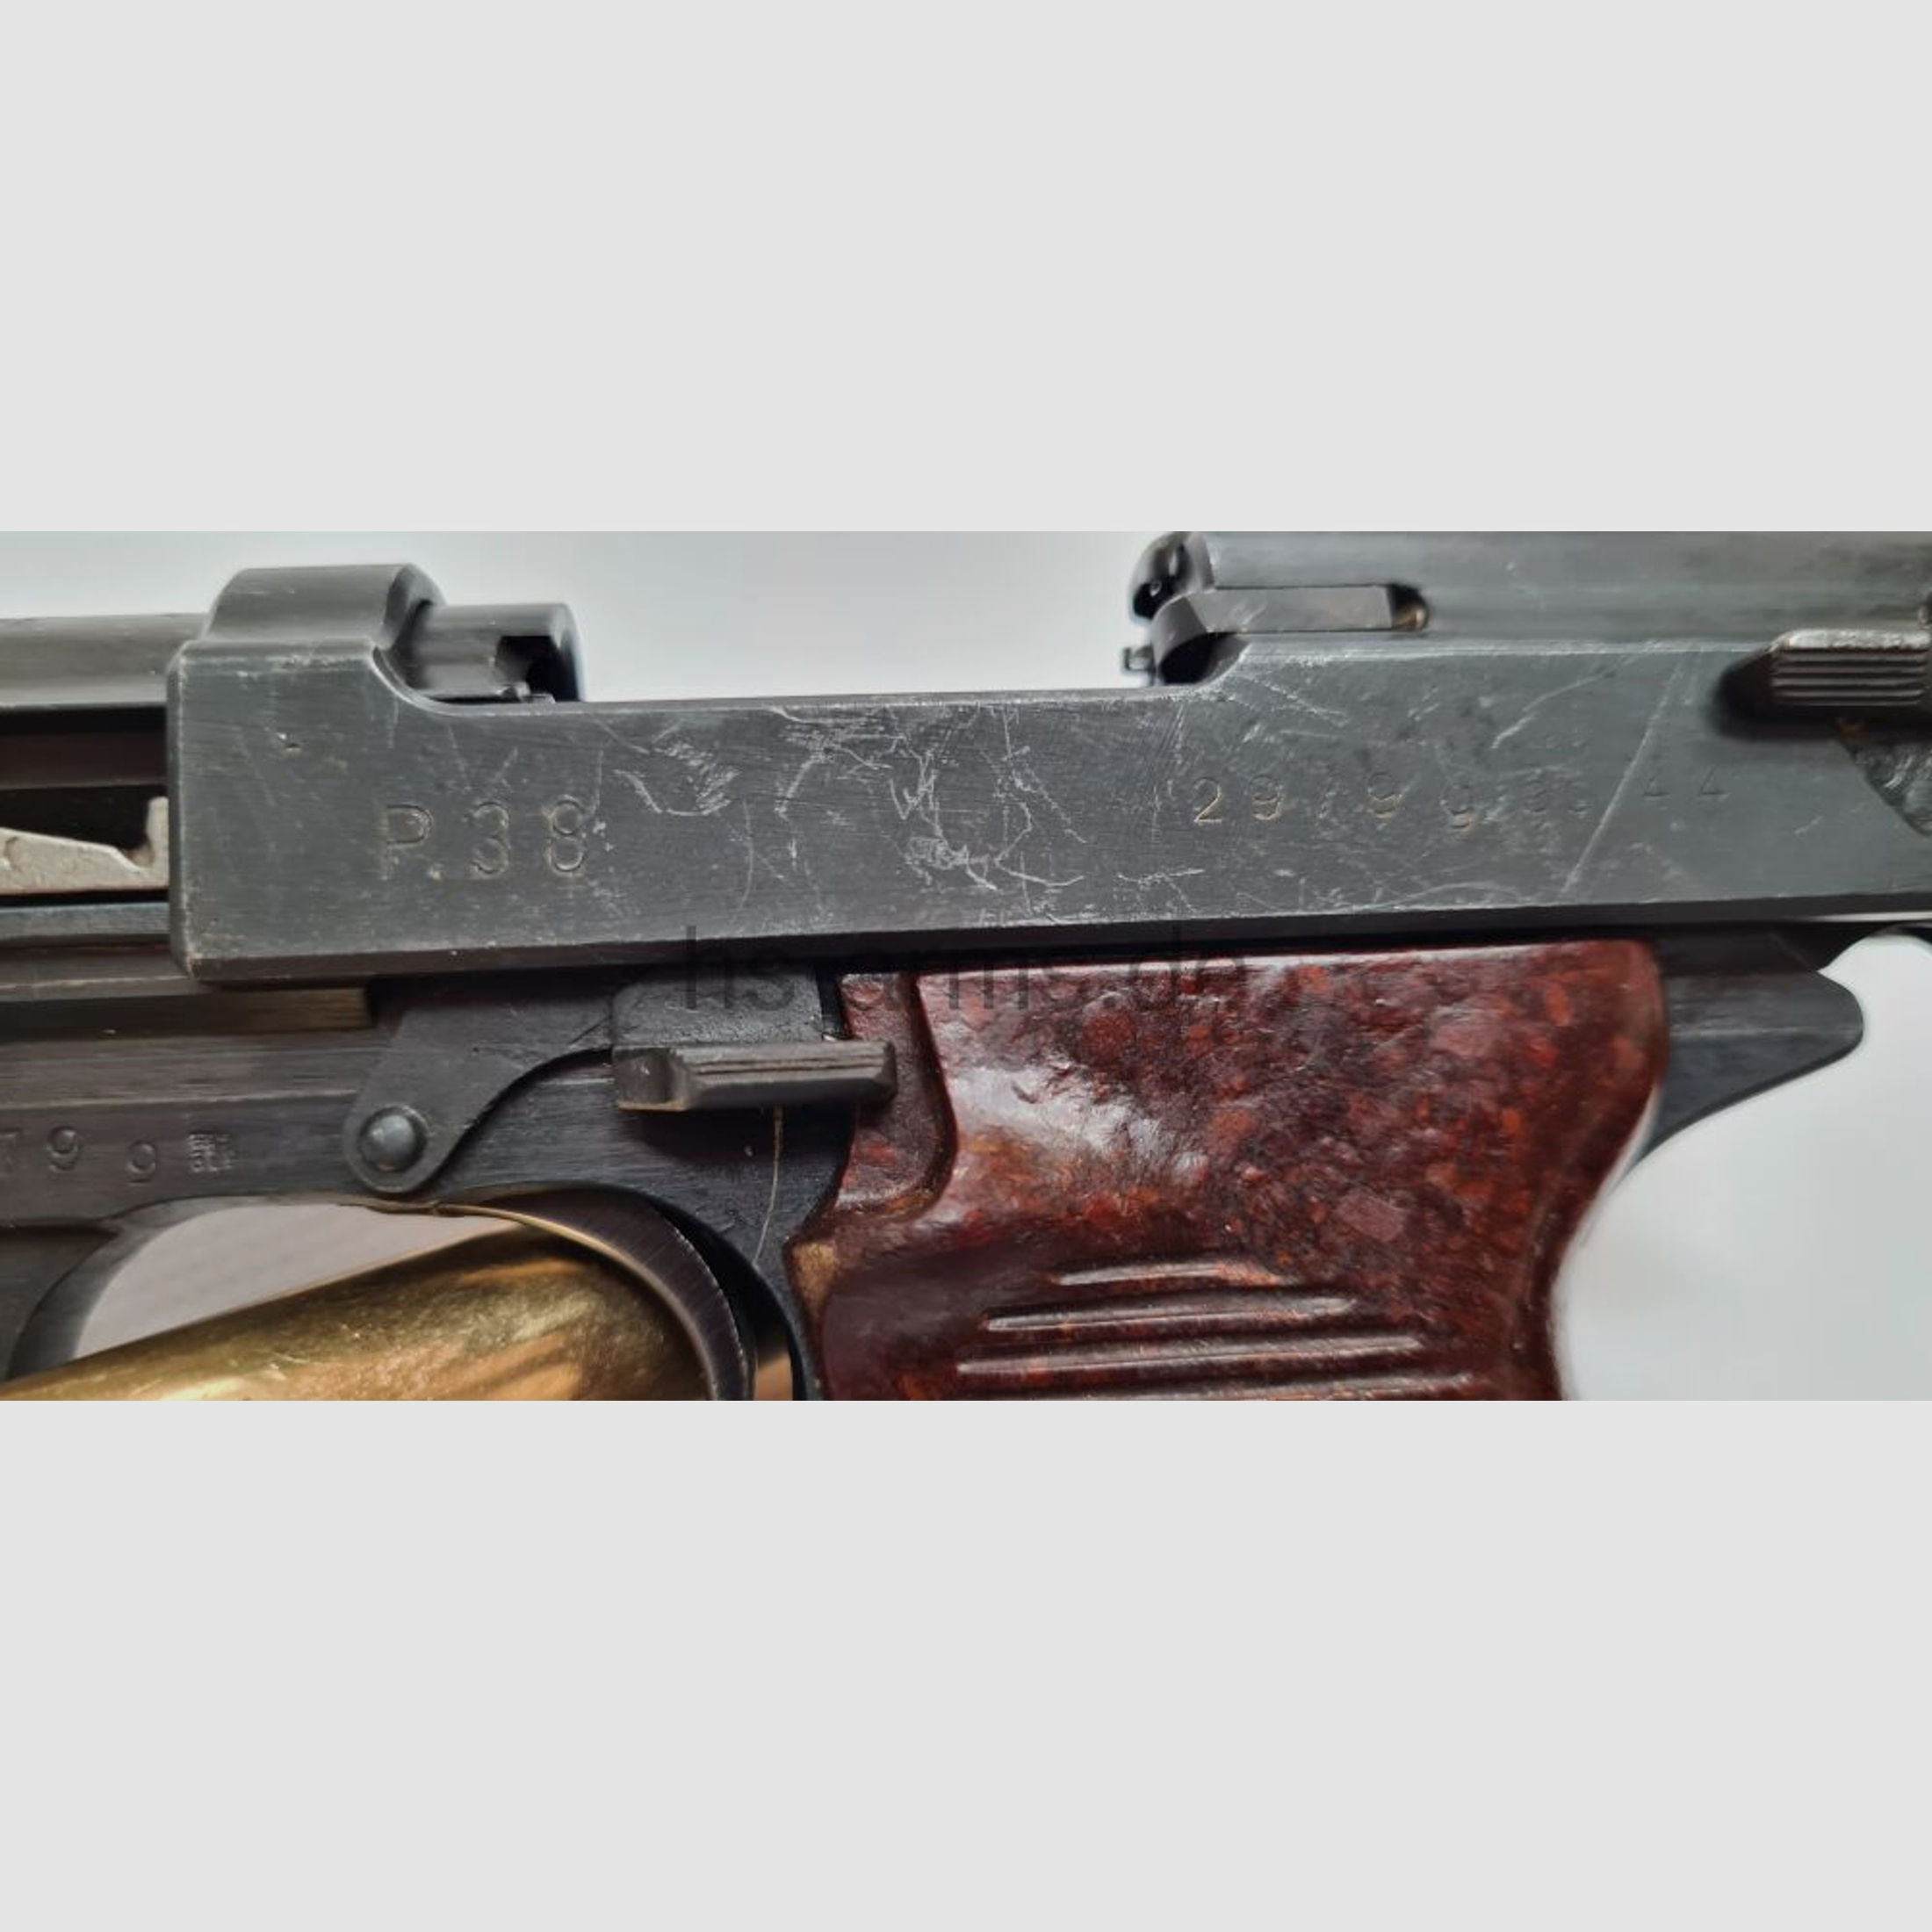 Walther	 Walther P38 "ac44"